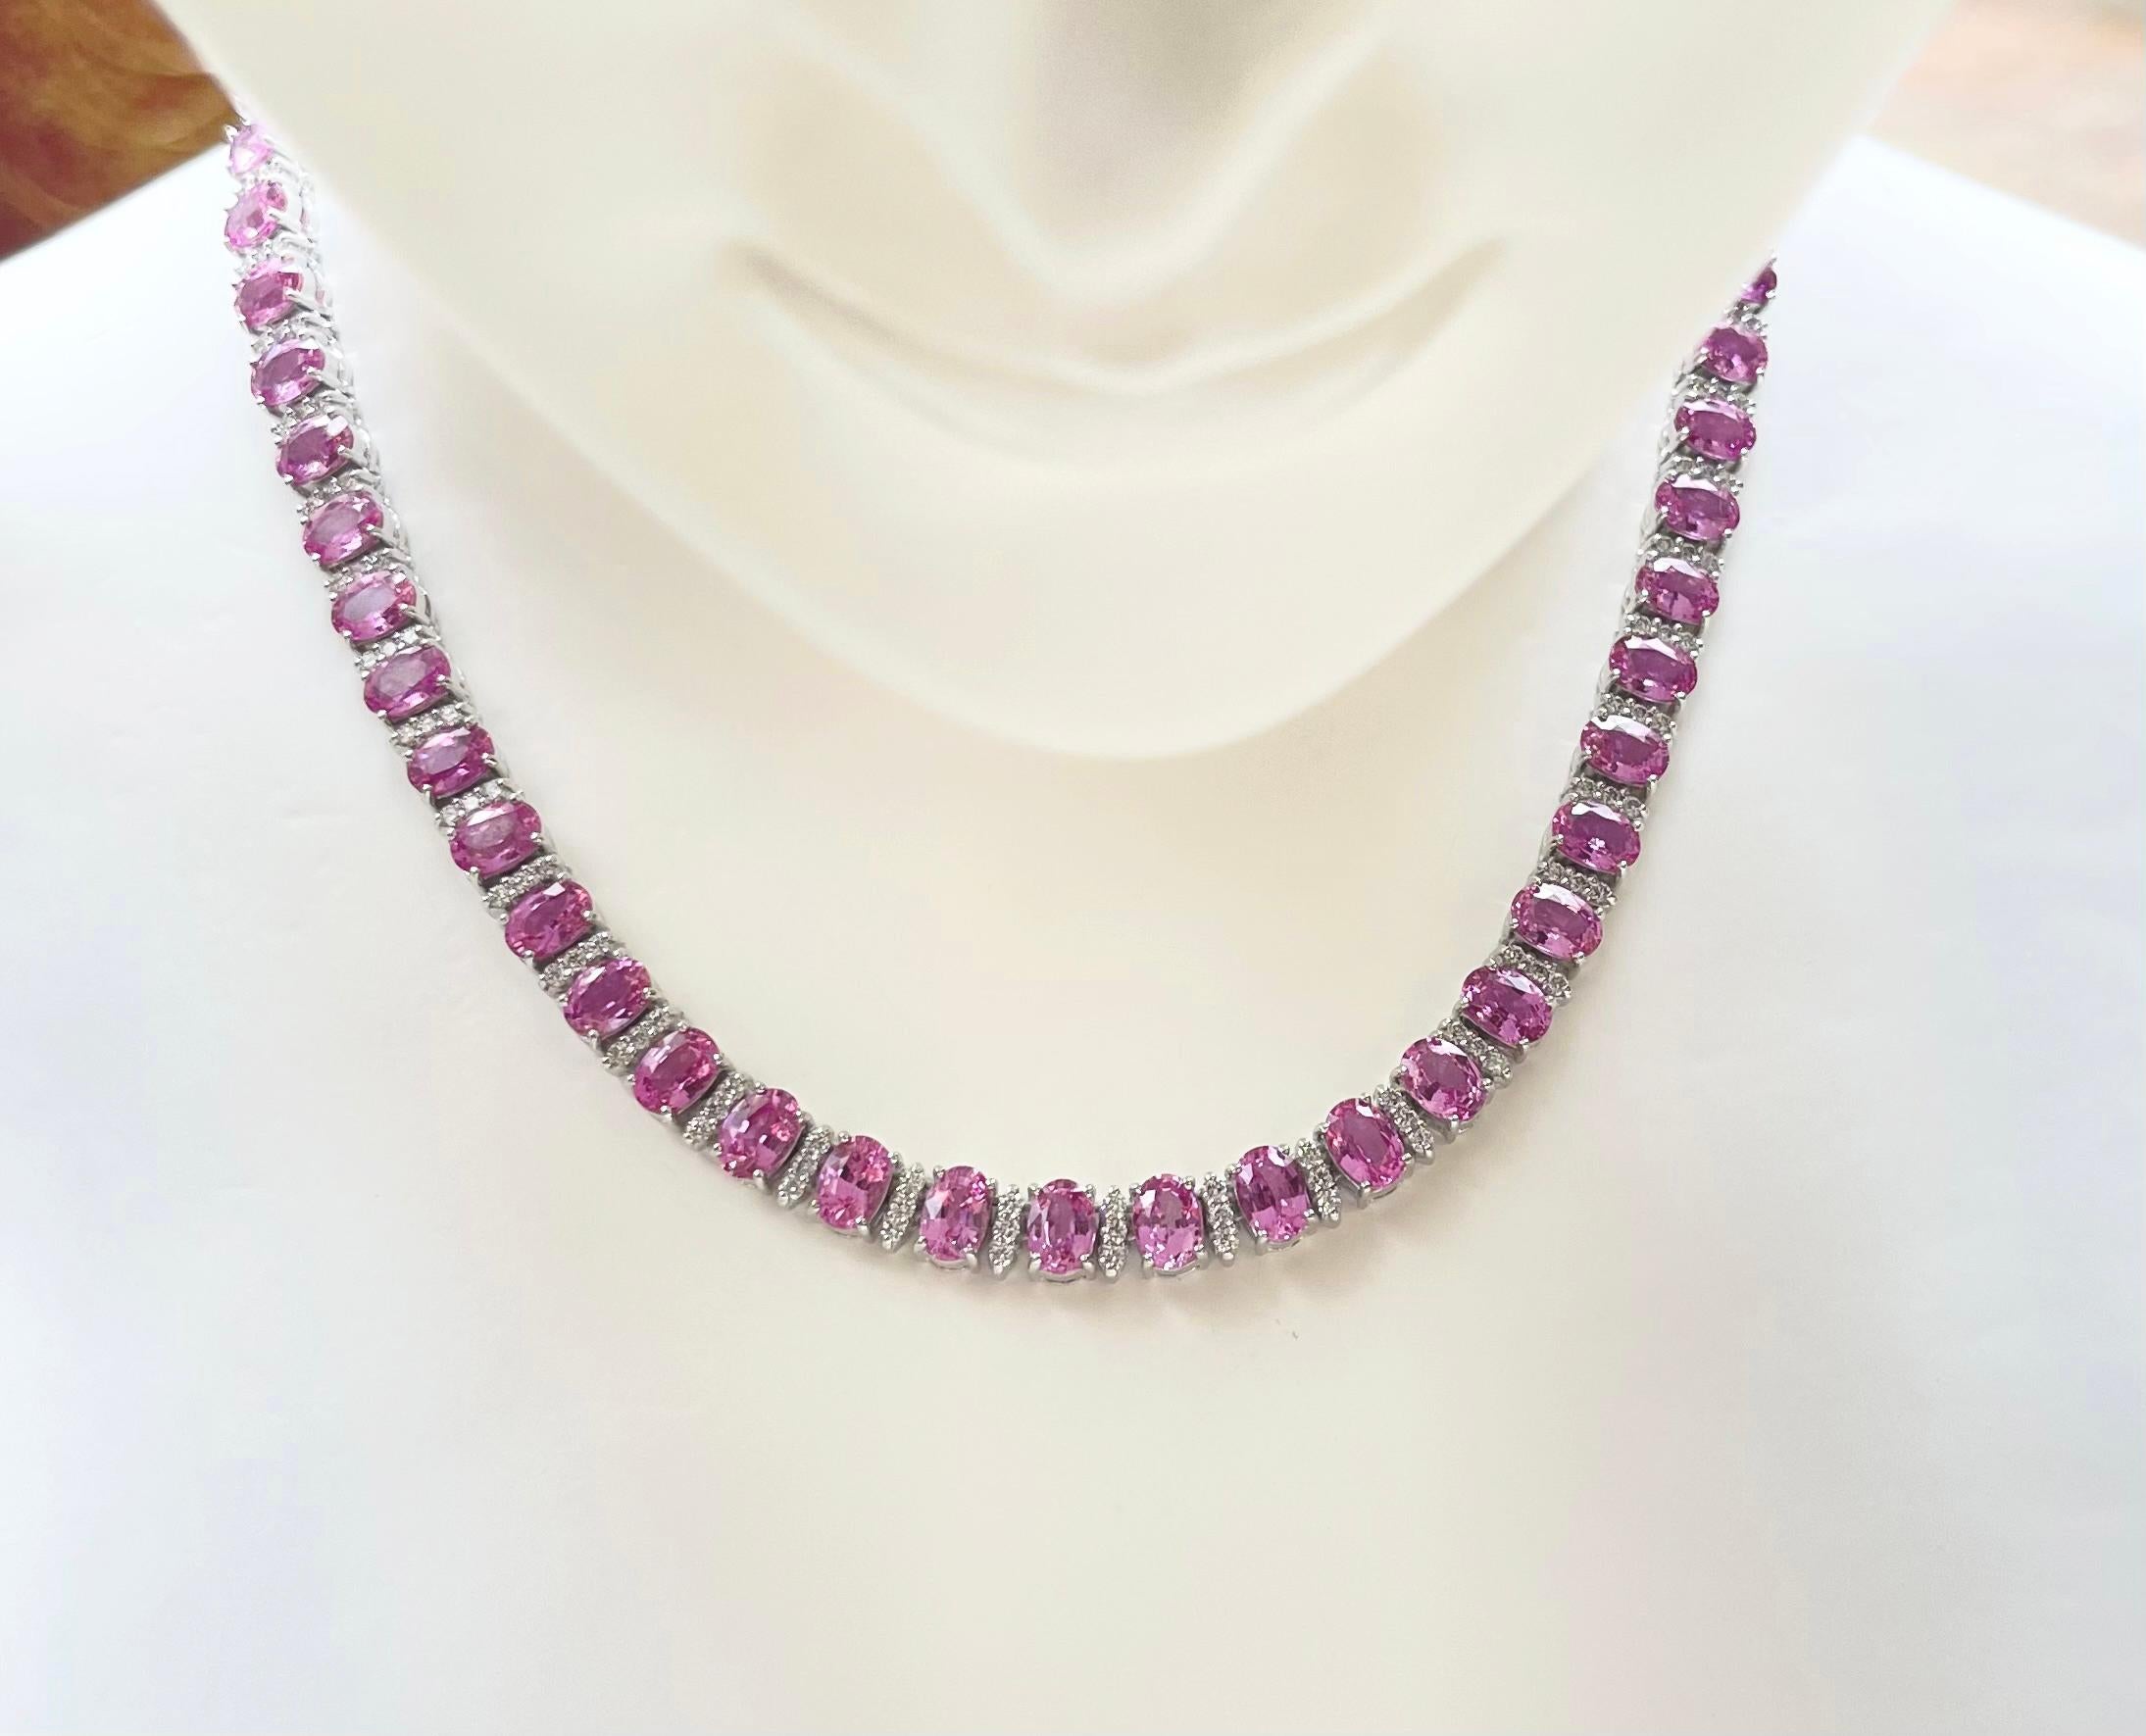 Pink Sapphire 50.66 carats with Diamond 3.42 carats Necklace set in 18K White Gold Settings

Width: 0.7 cm 
Length: 41.0 cm
Total Weight: 77.18 grams

